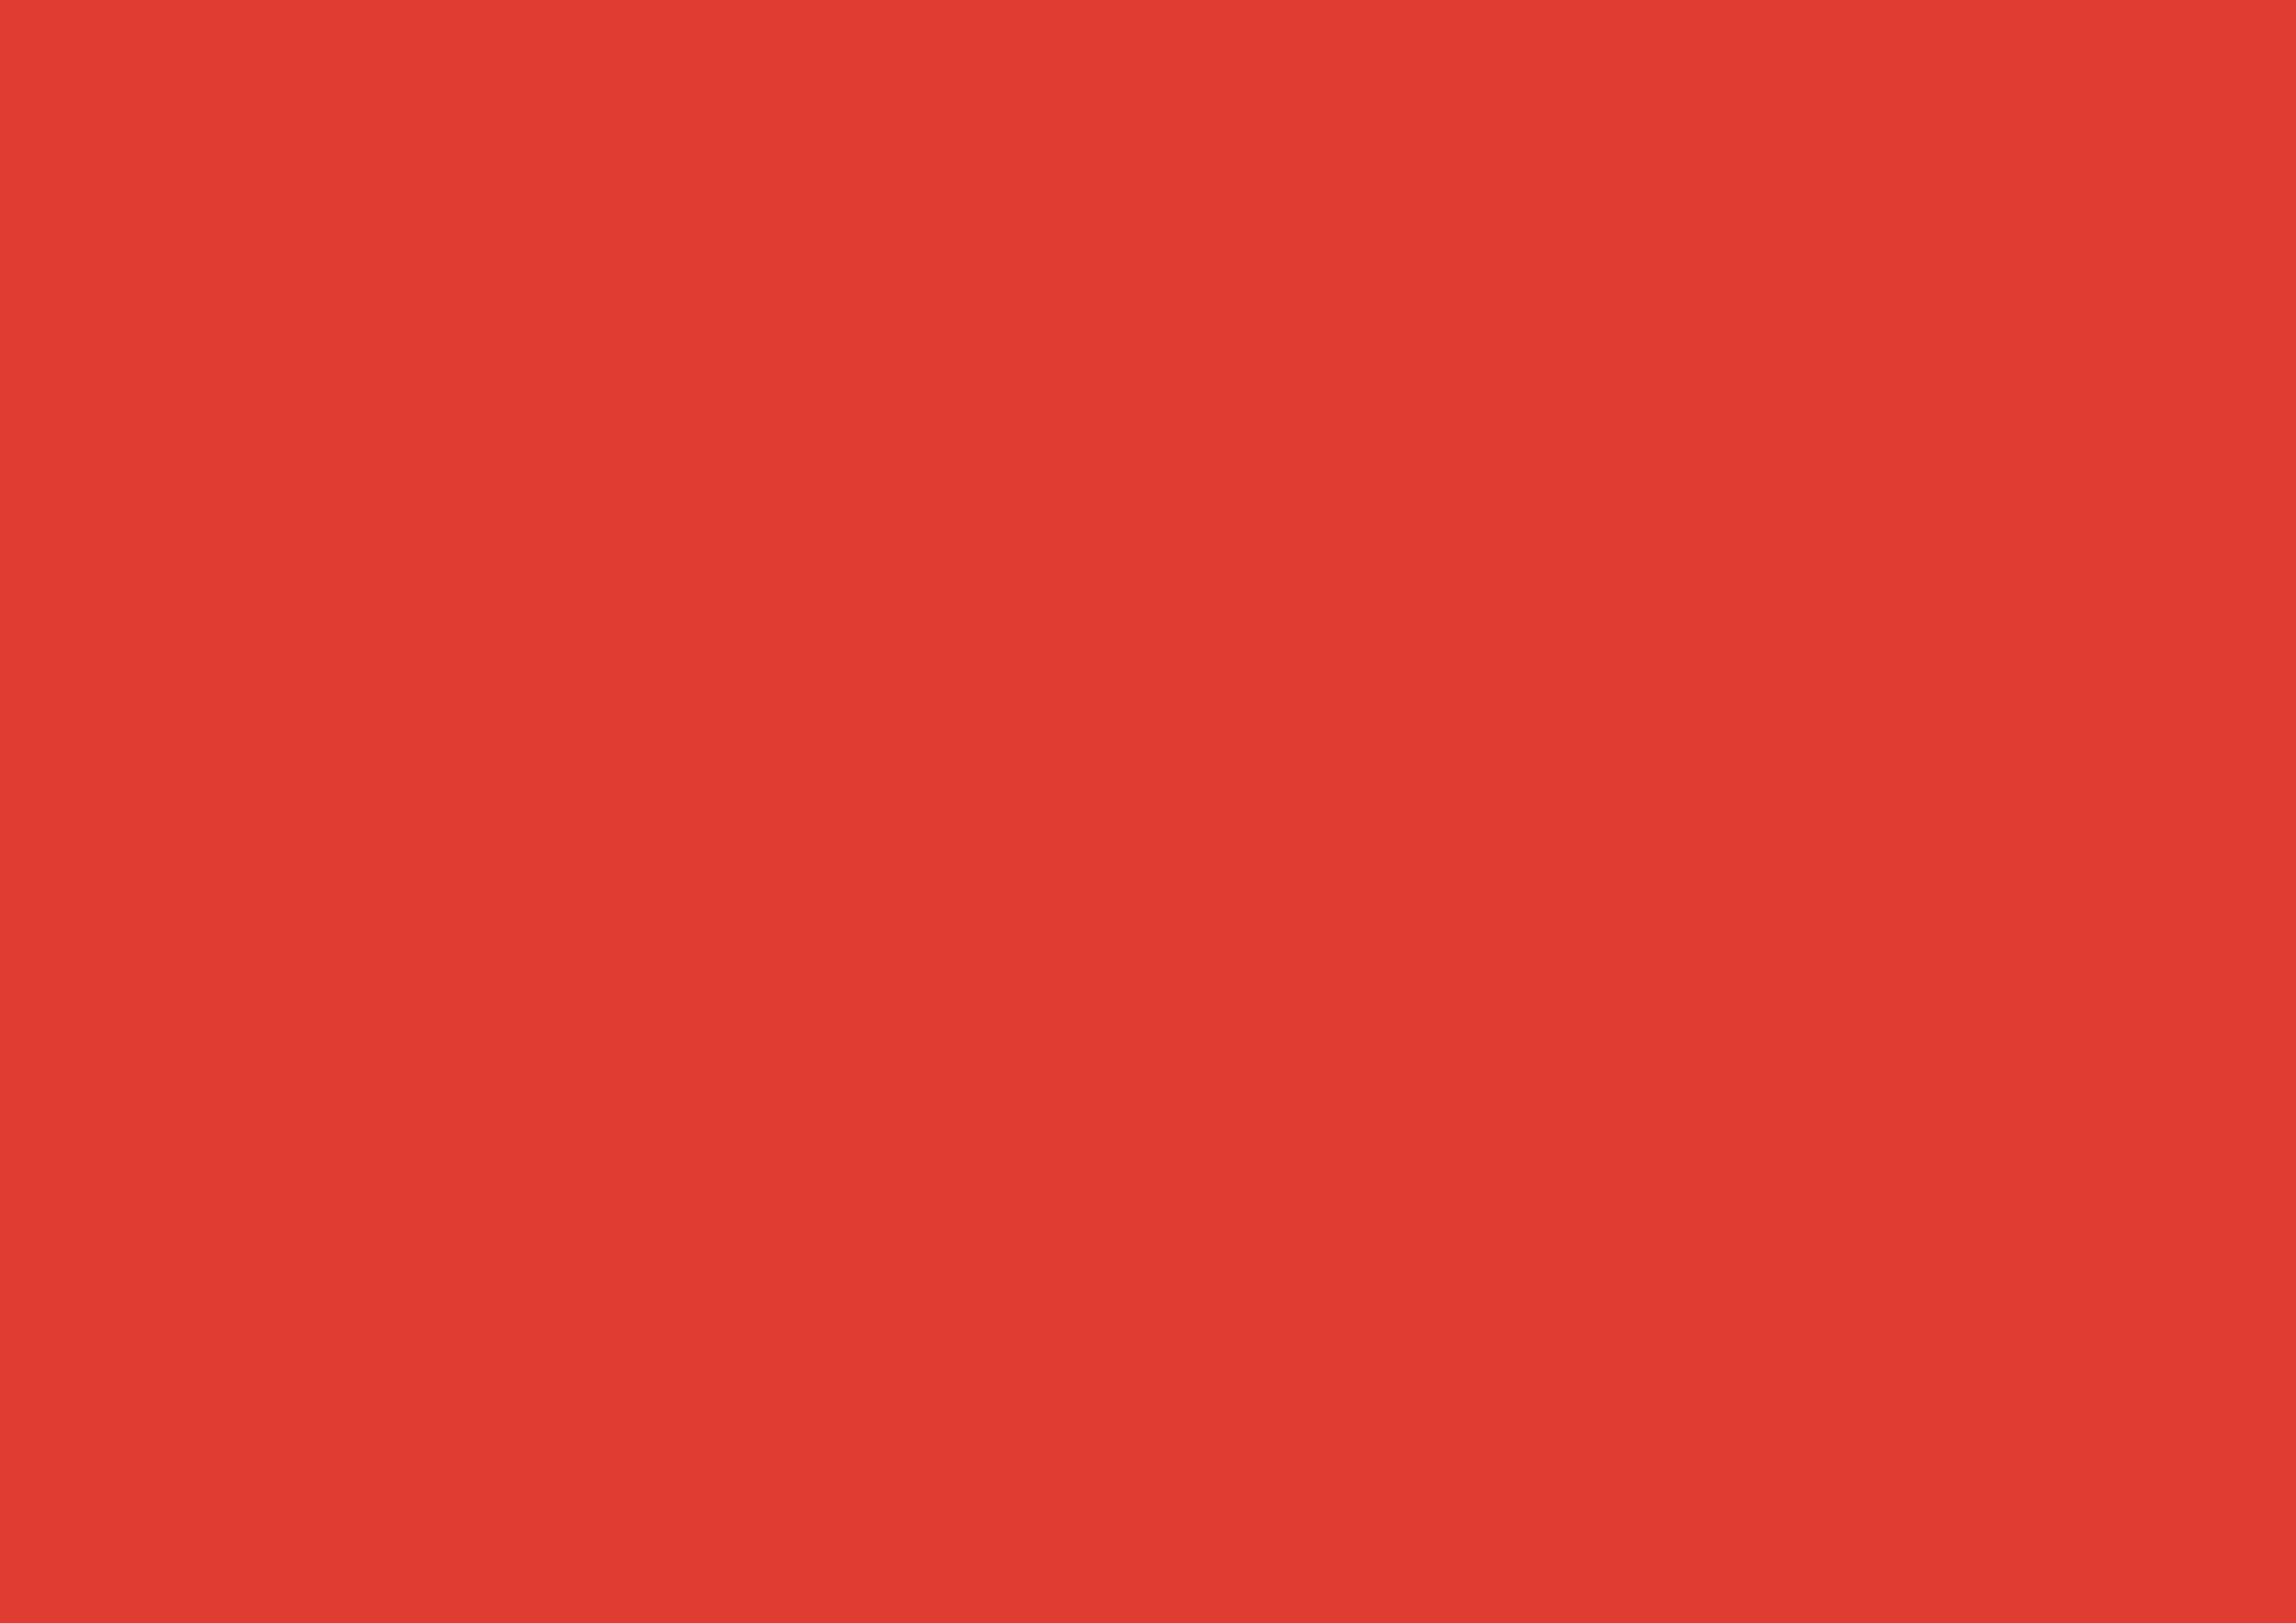 3508x2480 CG Red Solid Color Background